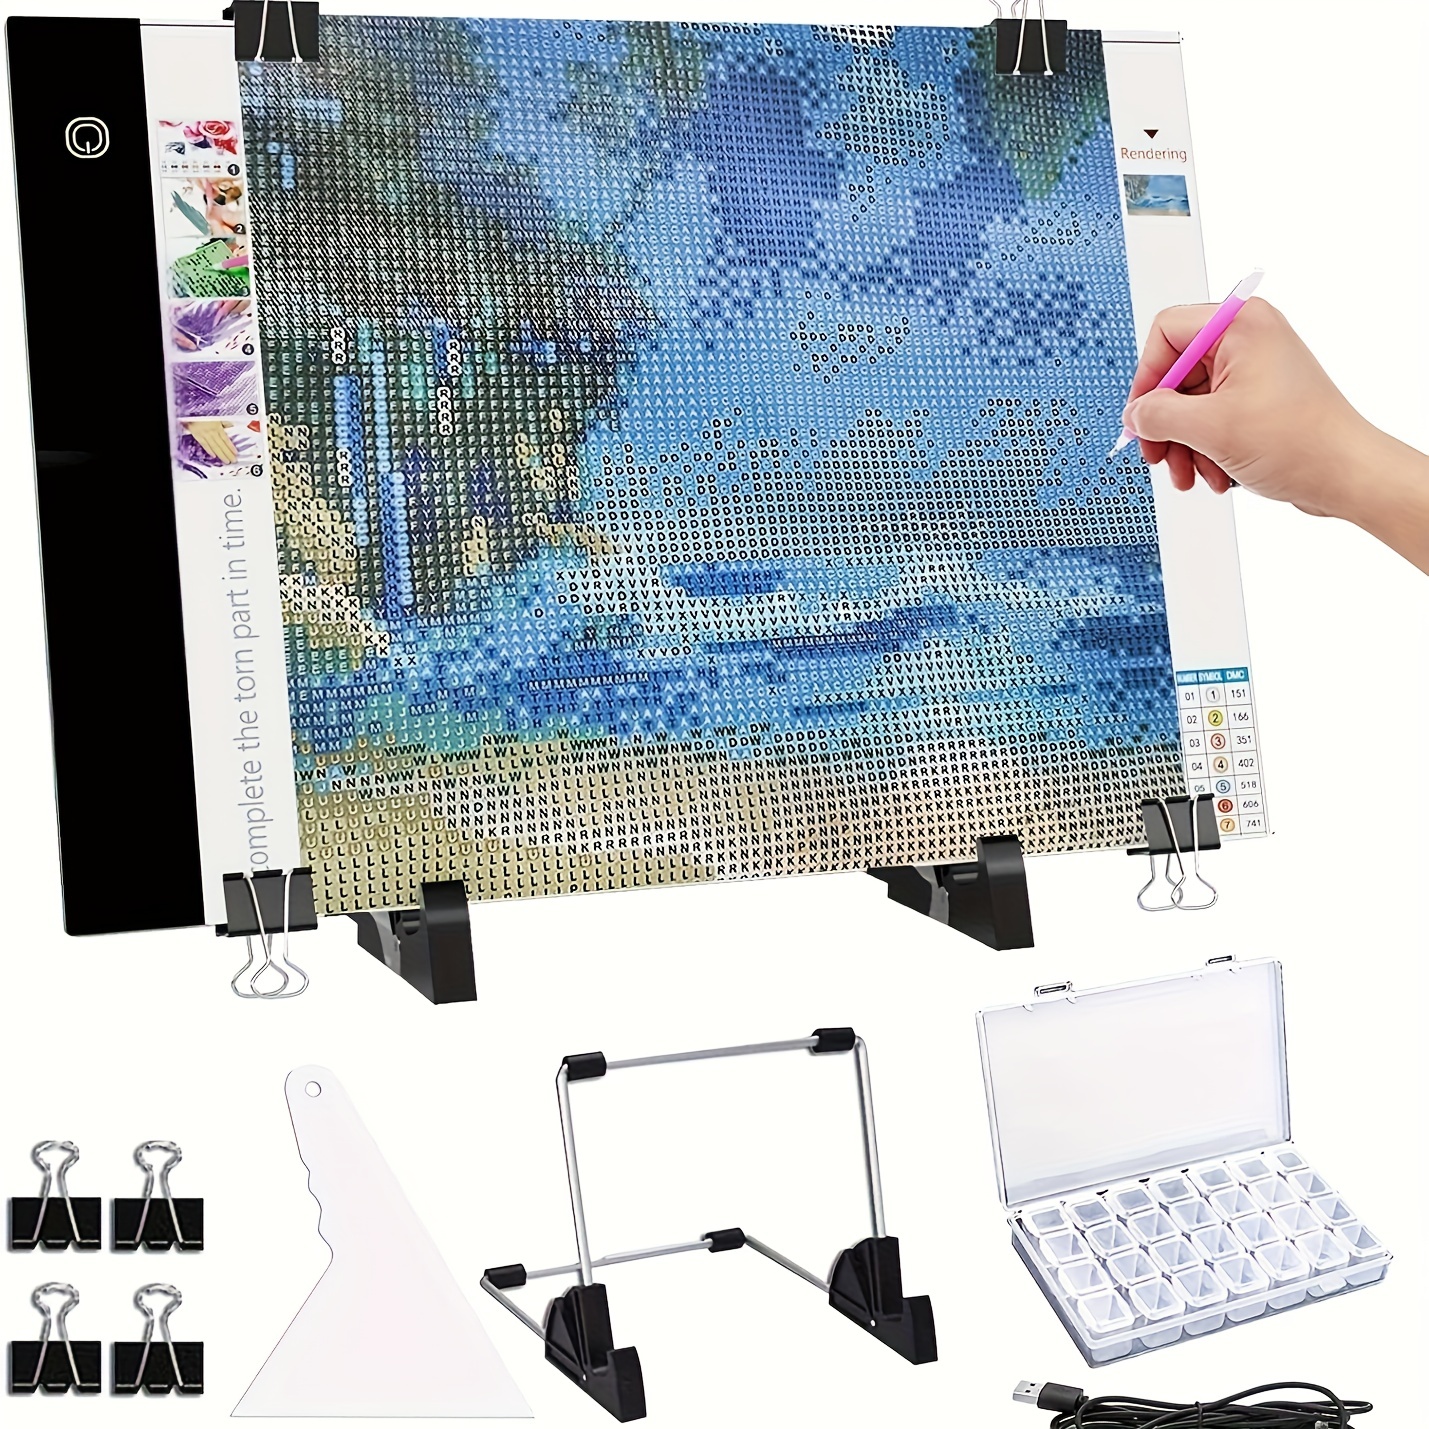  59 Pcs Diamond Painting A4 LED Light Pad Kit, 5D Diamond  Painting Accessories Tool Kit Full Drill for Adults and Kids, Supplies  Includes Storage Case, Pens,Stand,Pad Board and More